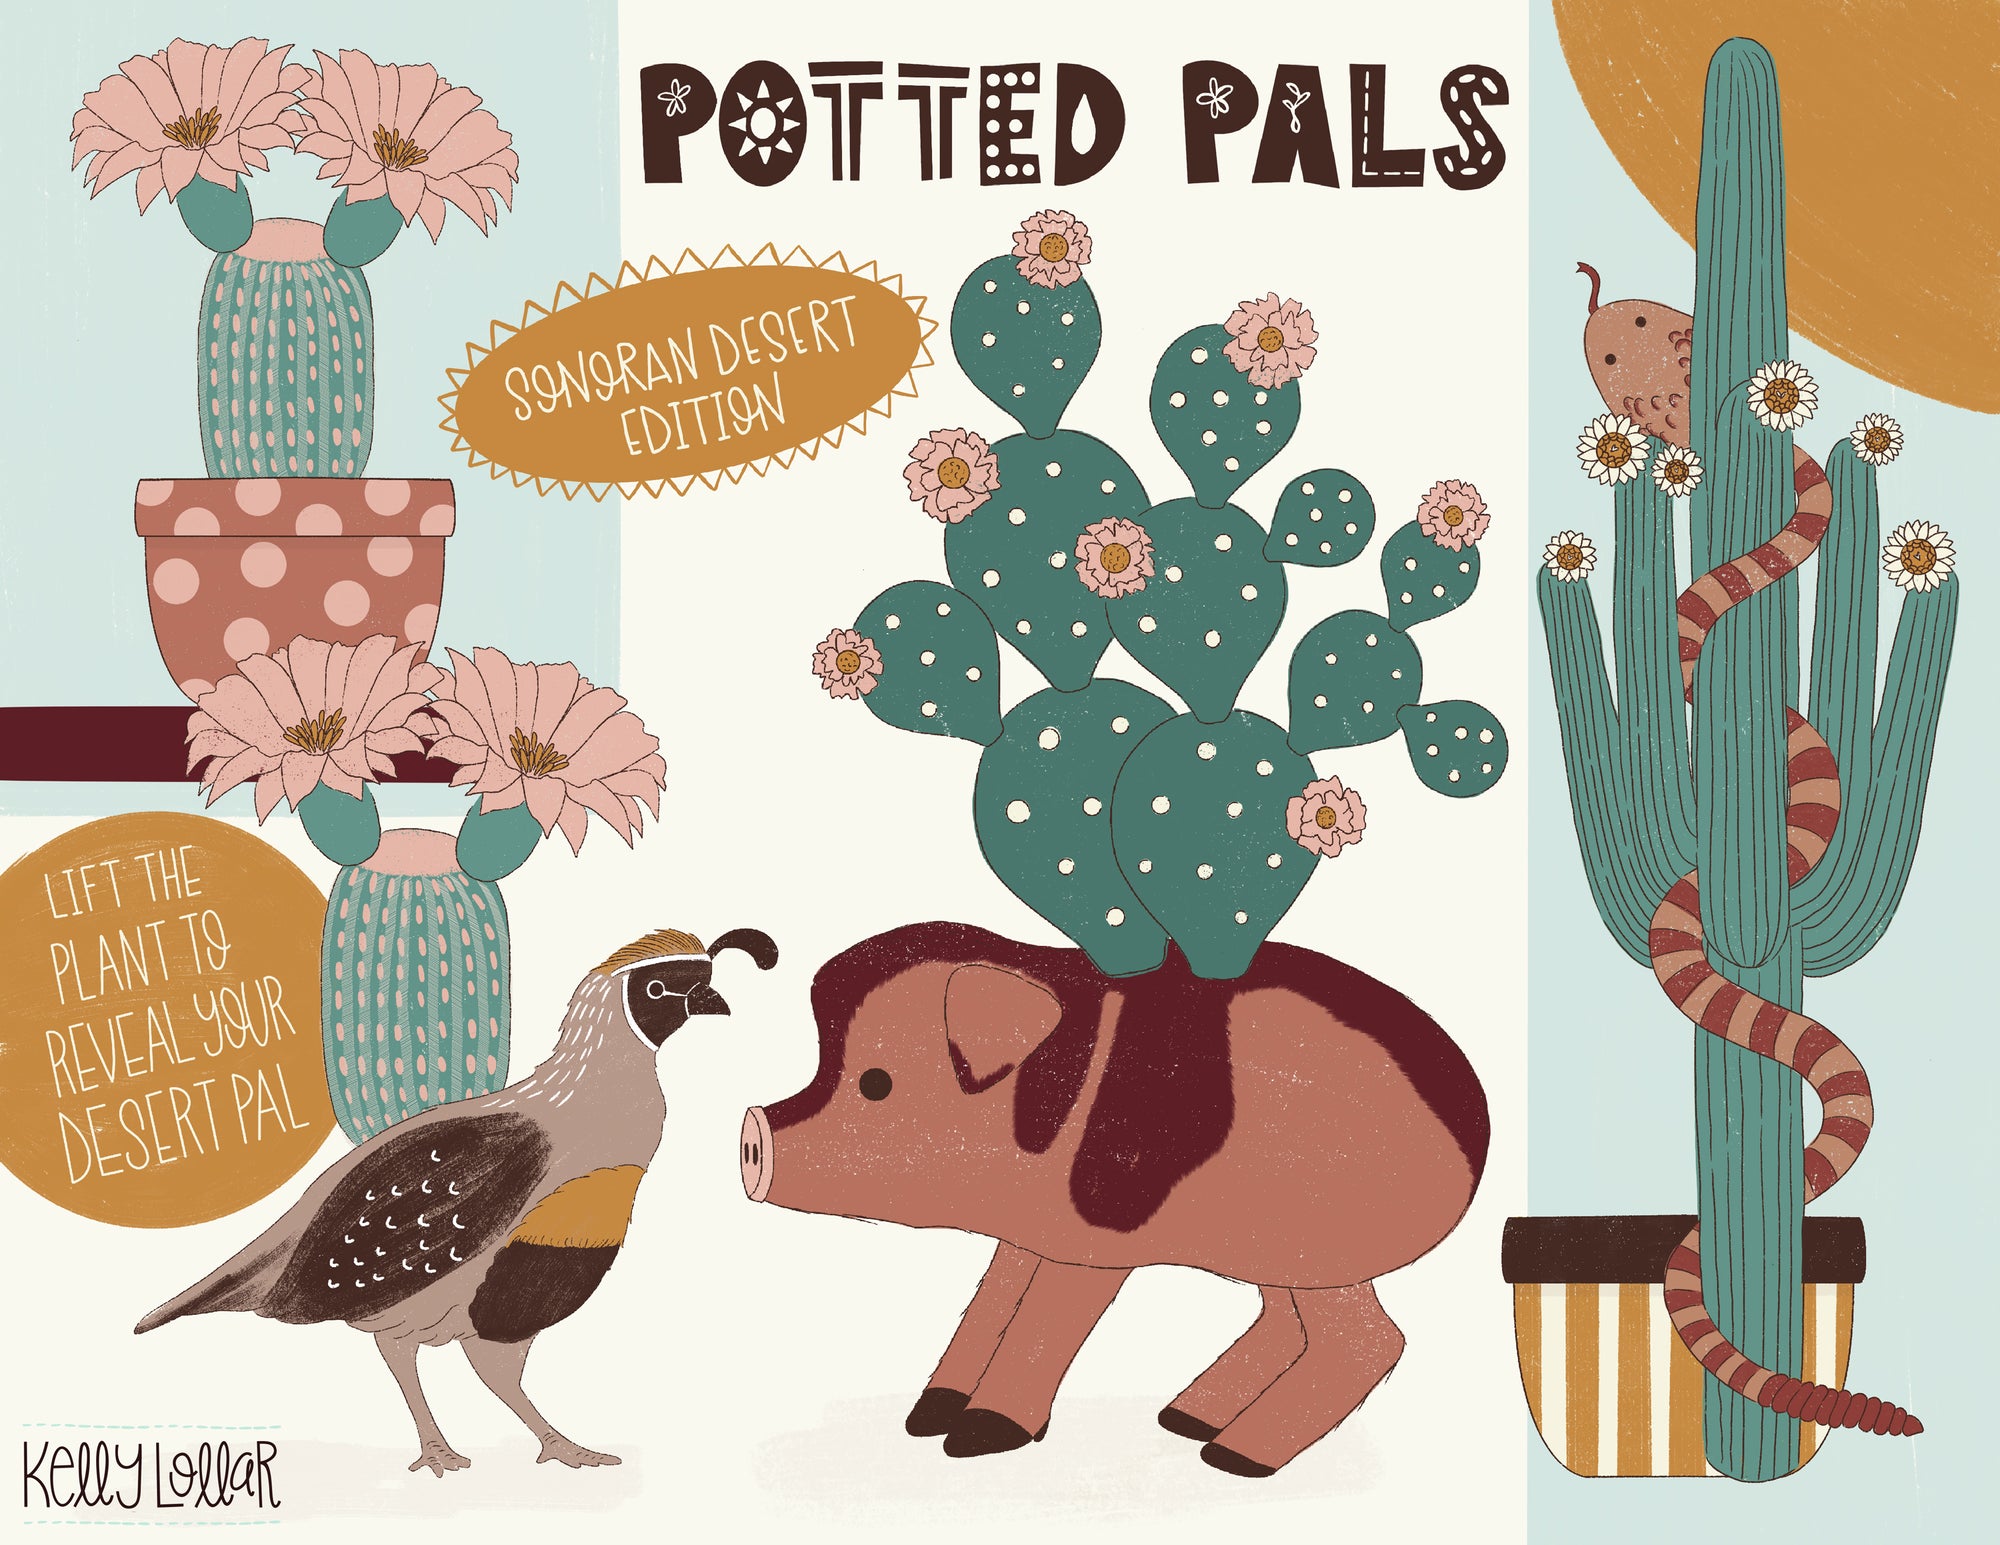 MATS My Toy Pitch Desert Animal and Plant Combo Plush Concept by Kelly Lollar